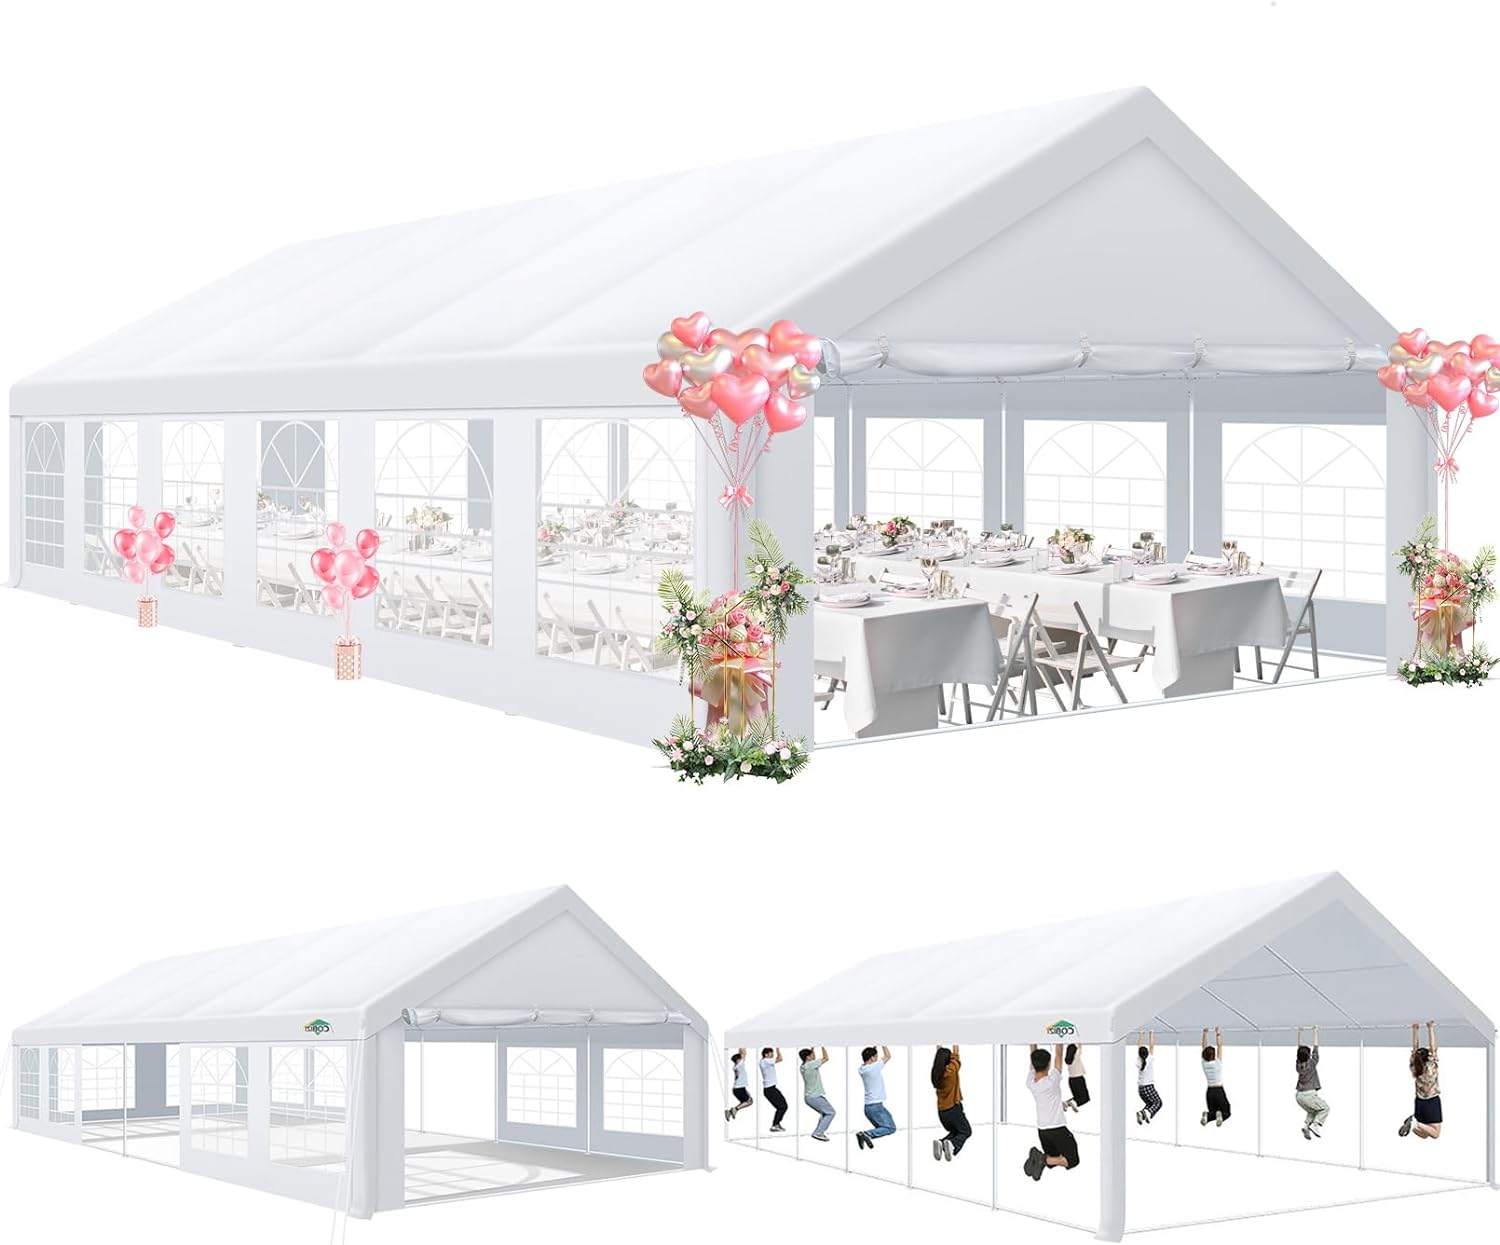 COBIZI 20' x 40' Heavy Duty Party Tent,Carport Event Tent w/Removable Sidewall,Commercial Outdoor Canopy Wedding Tent,UV 50+,Waterproof